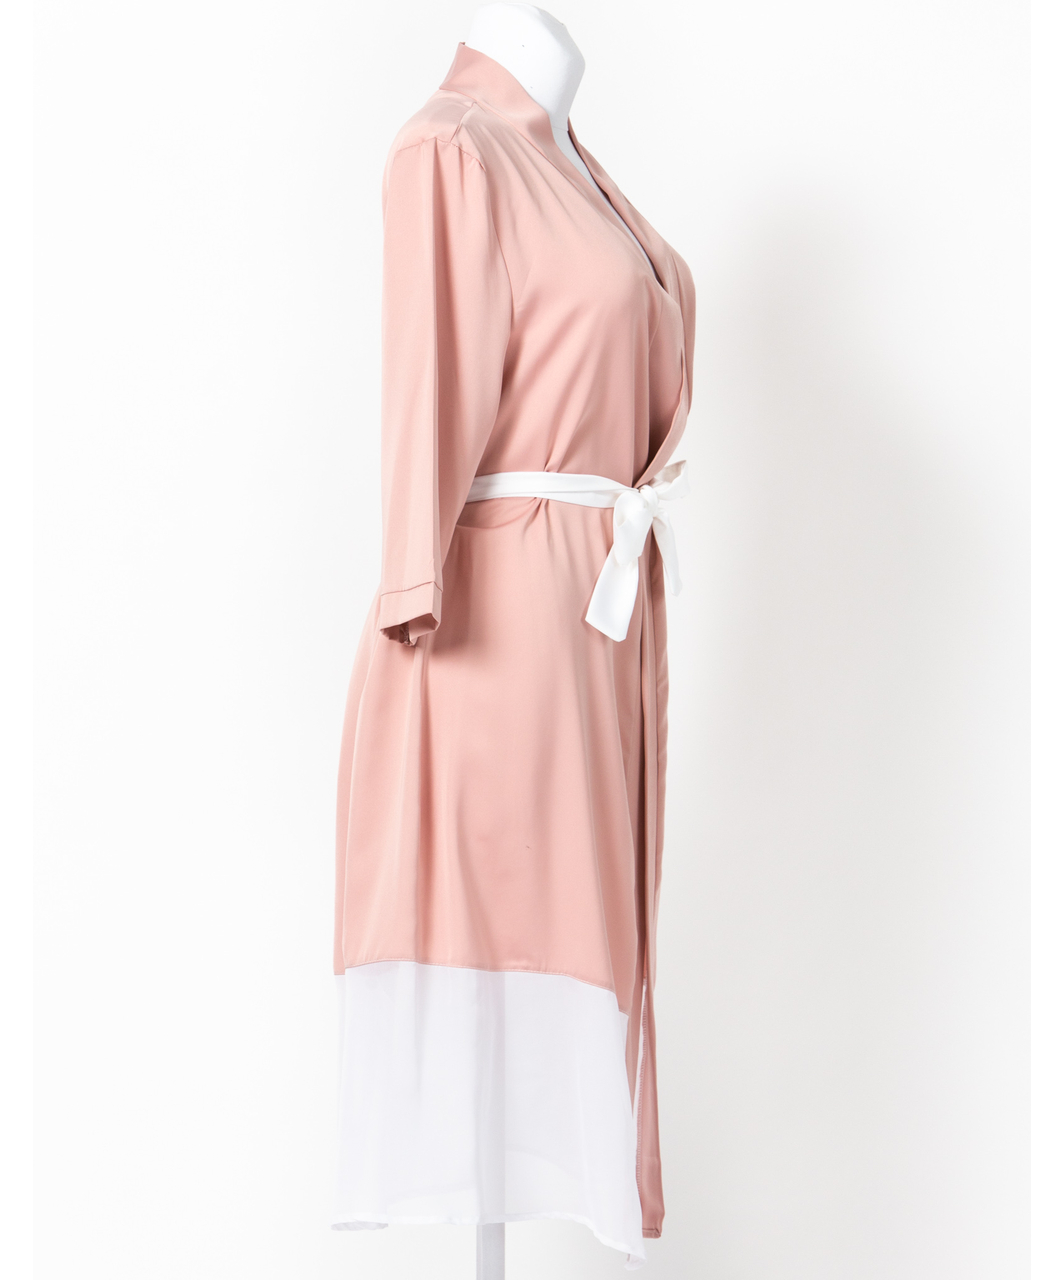 SexyStyle rose gold robe with white belt and hemline